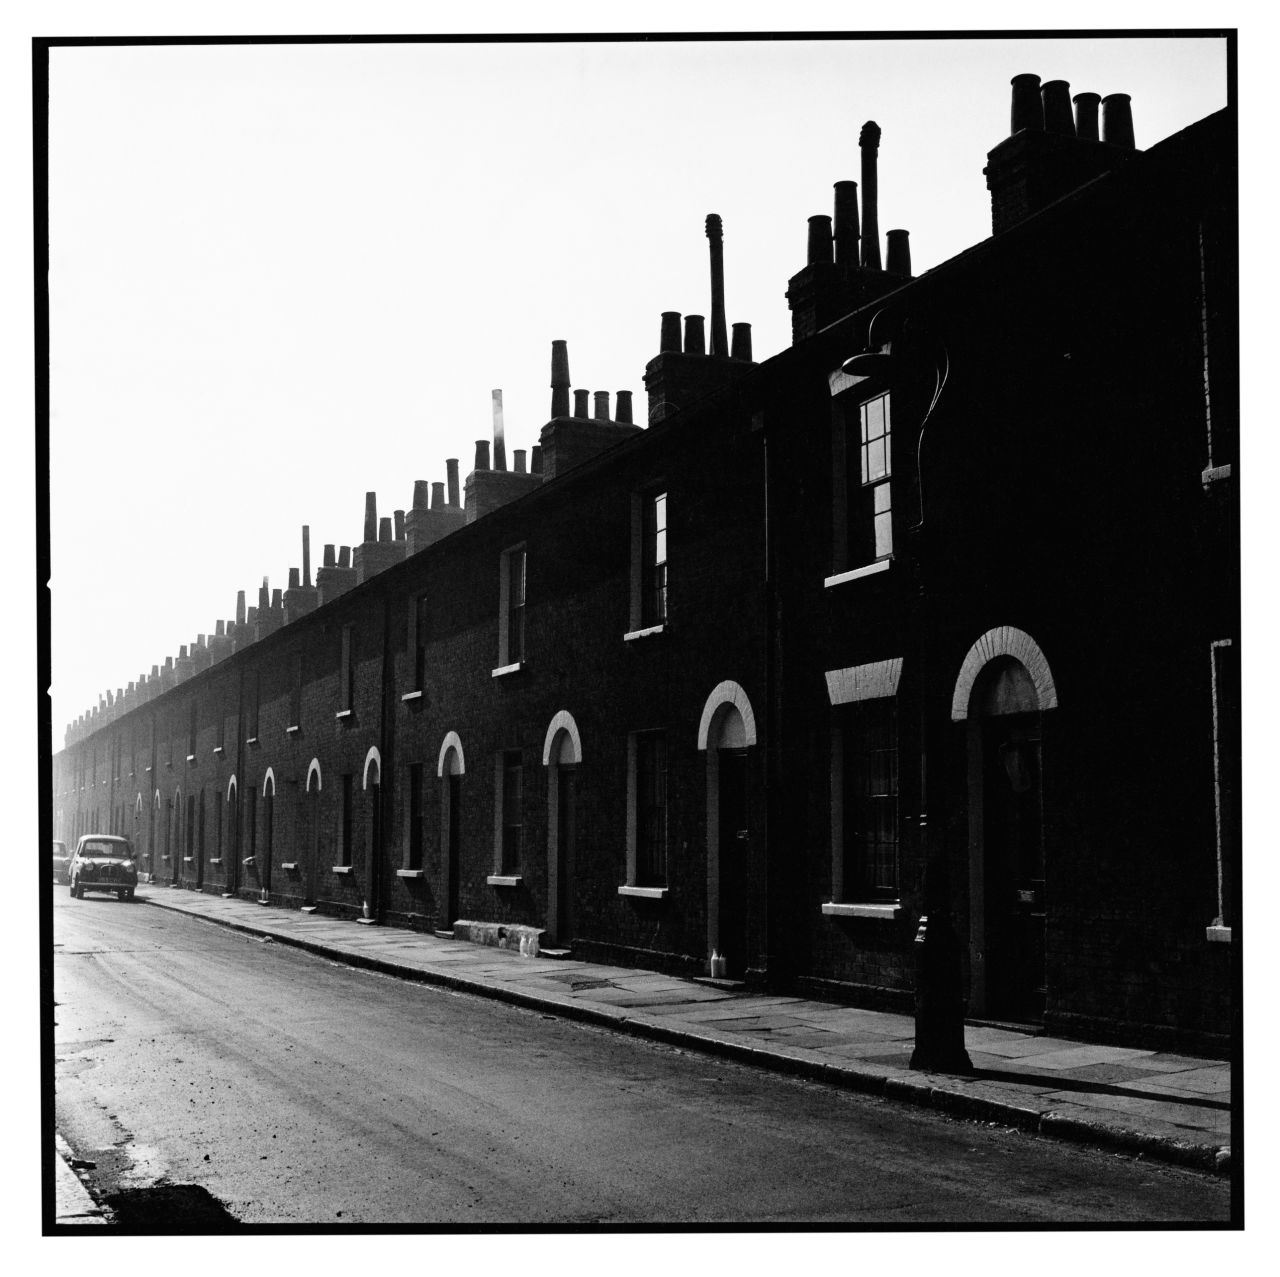 East End by David Bailey